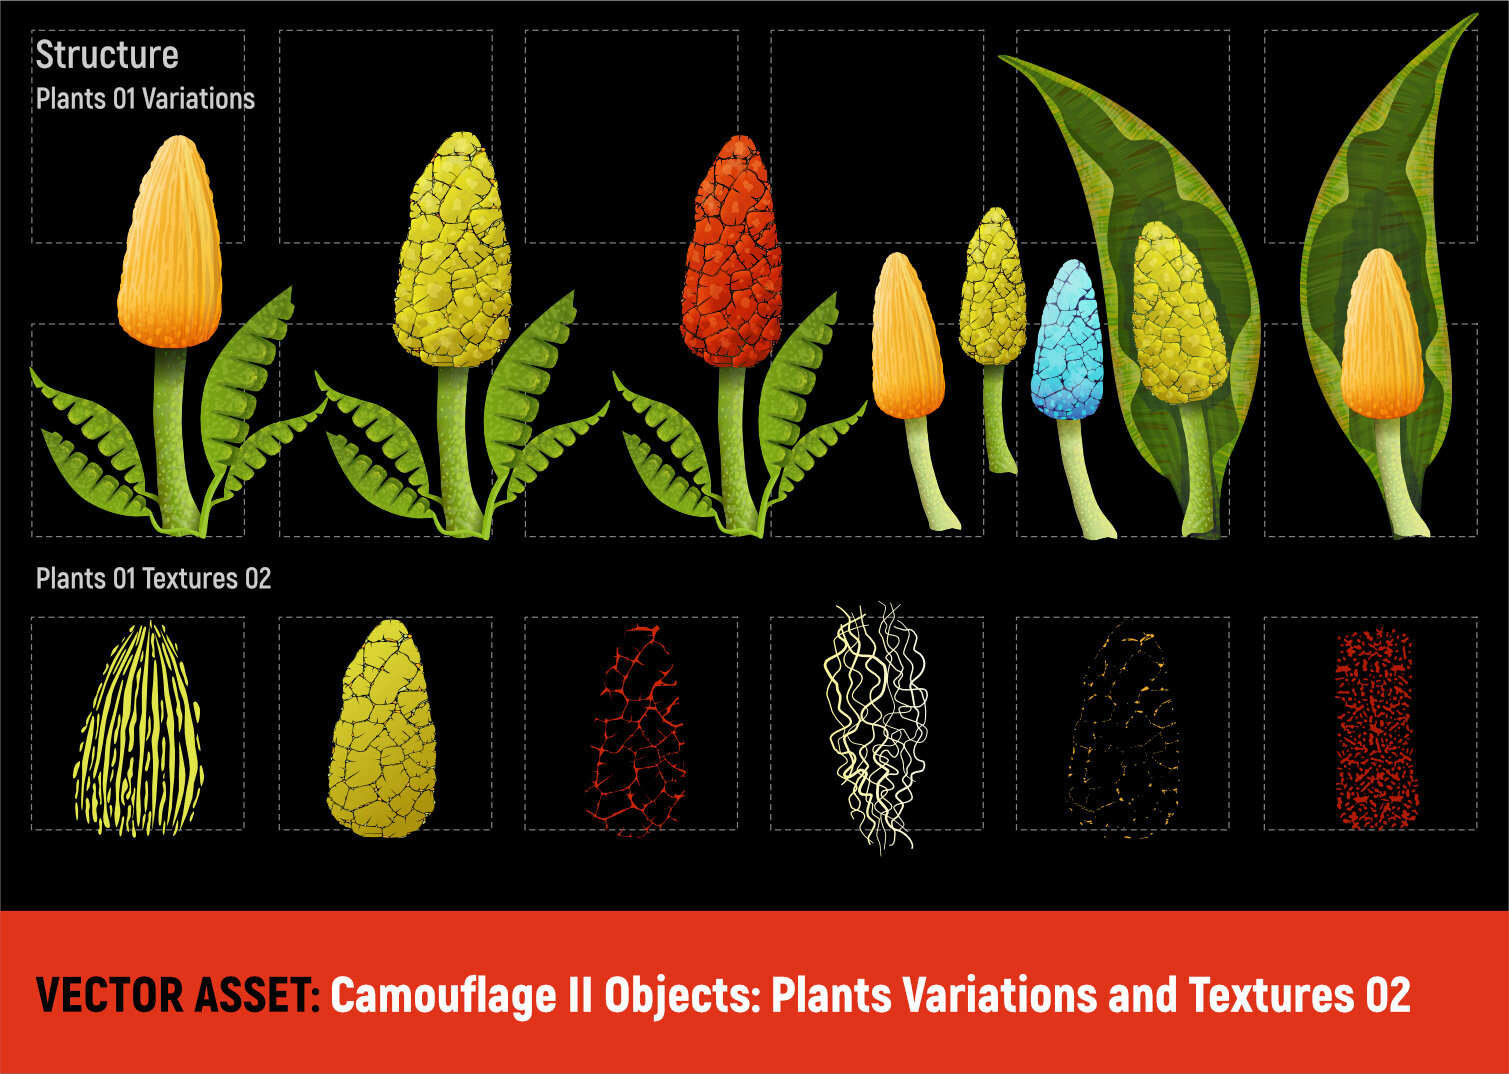 Vector Assets: Camouflage 2
Plants Variations and Textures 02